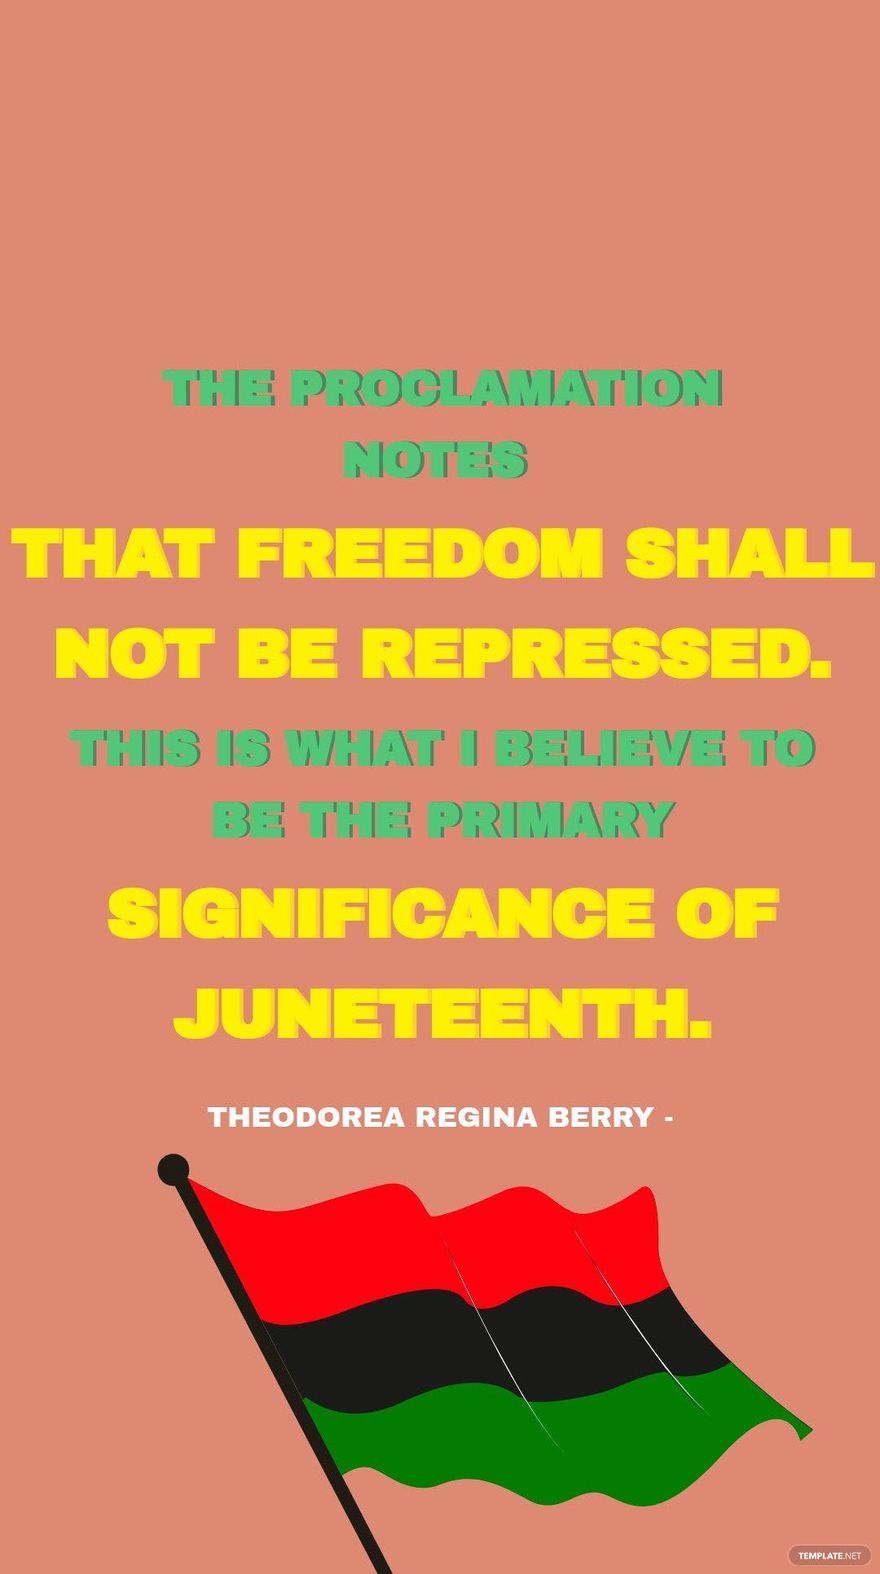 Free Theodorea Regina Berry - The proclamation notes that freedom shall not be repressed. This is what I believe to be the primary significance of Juneteenth. in JPG